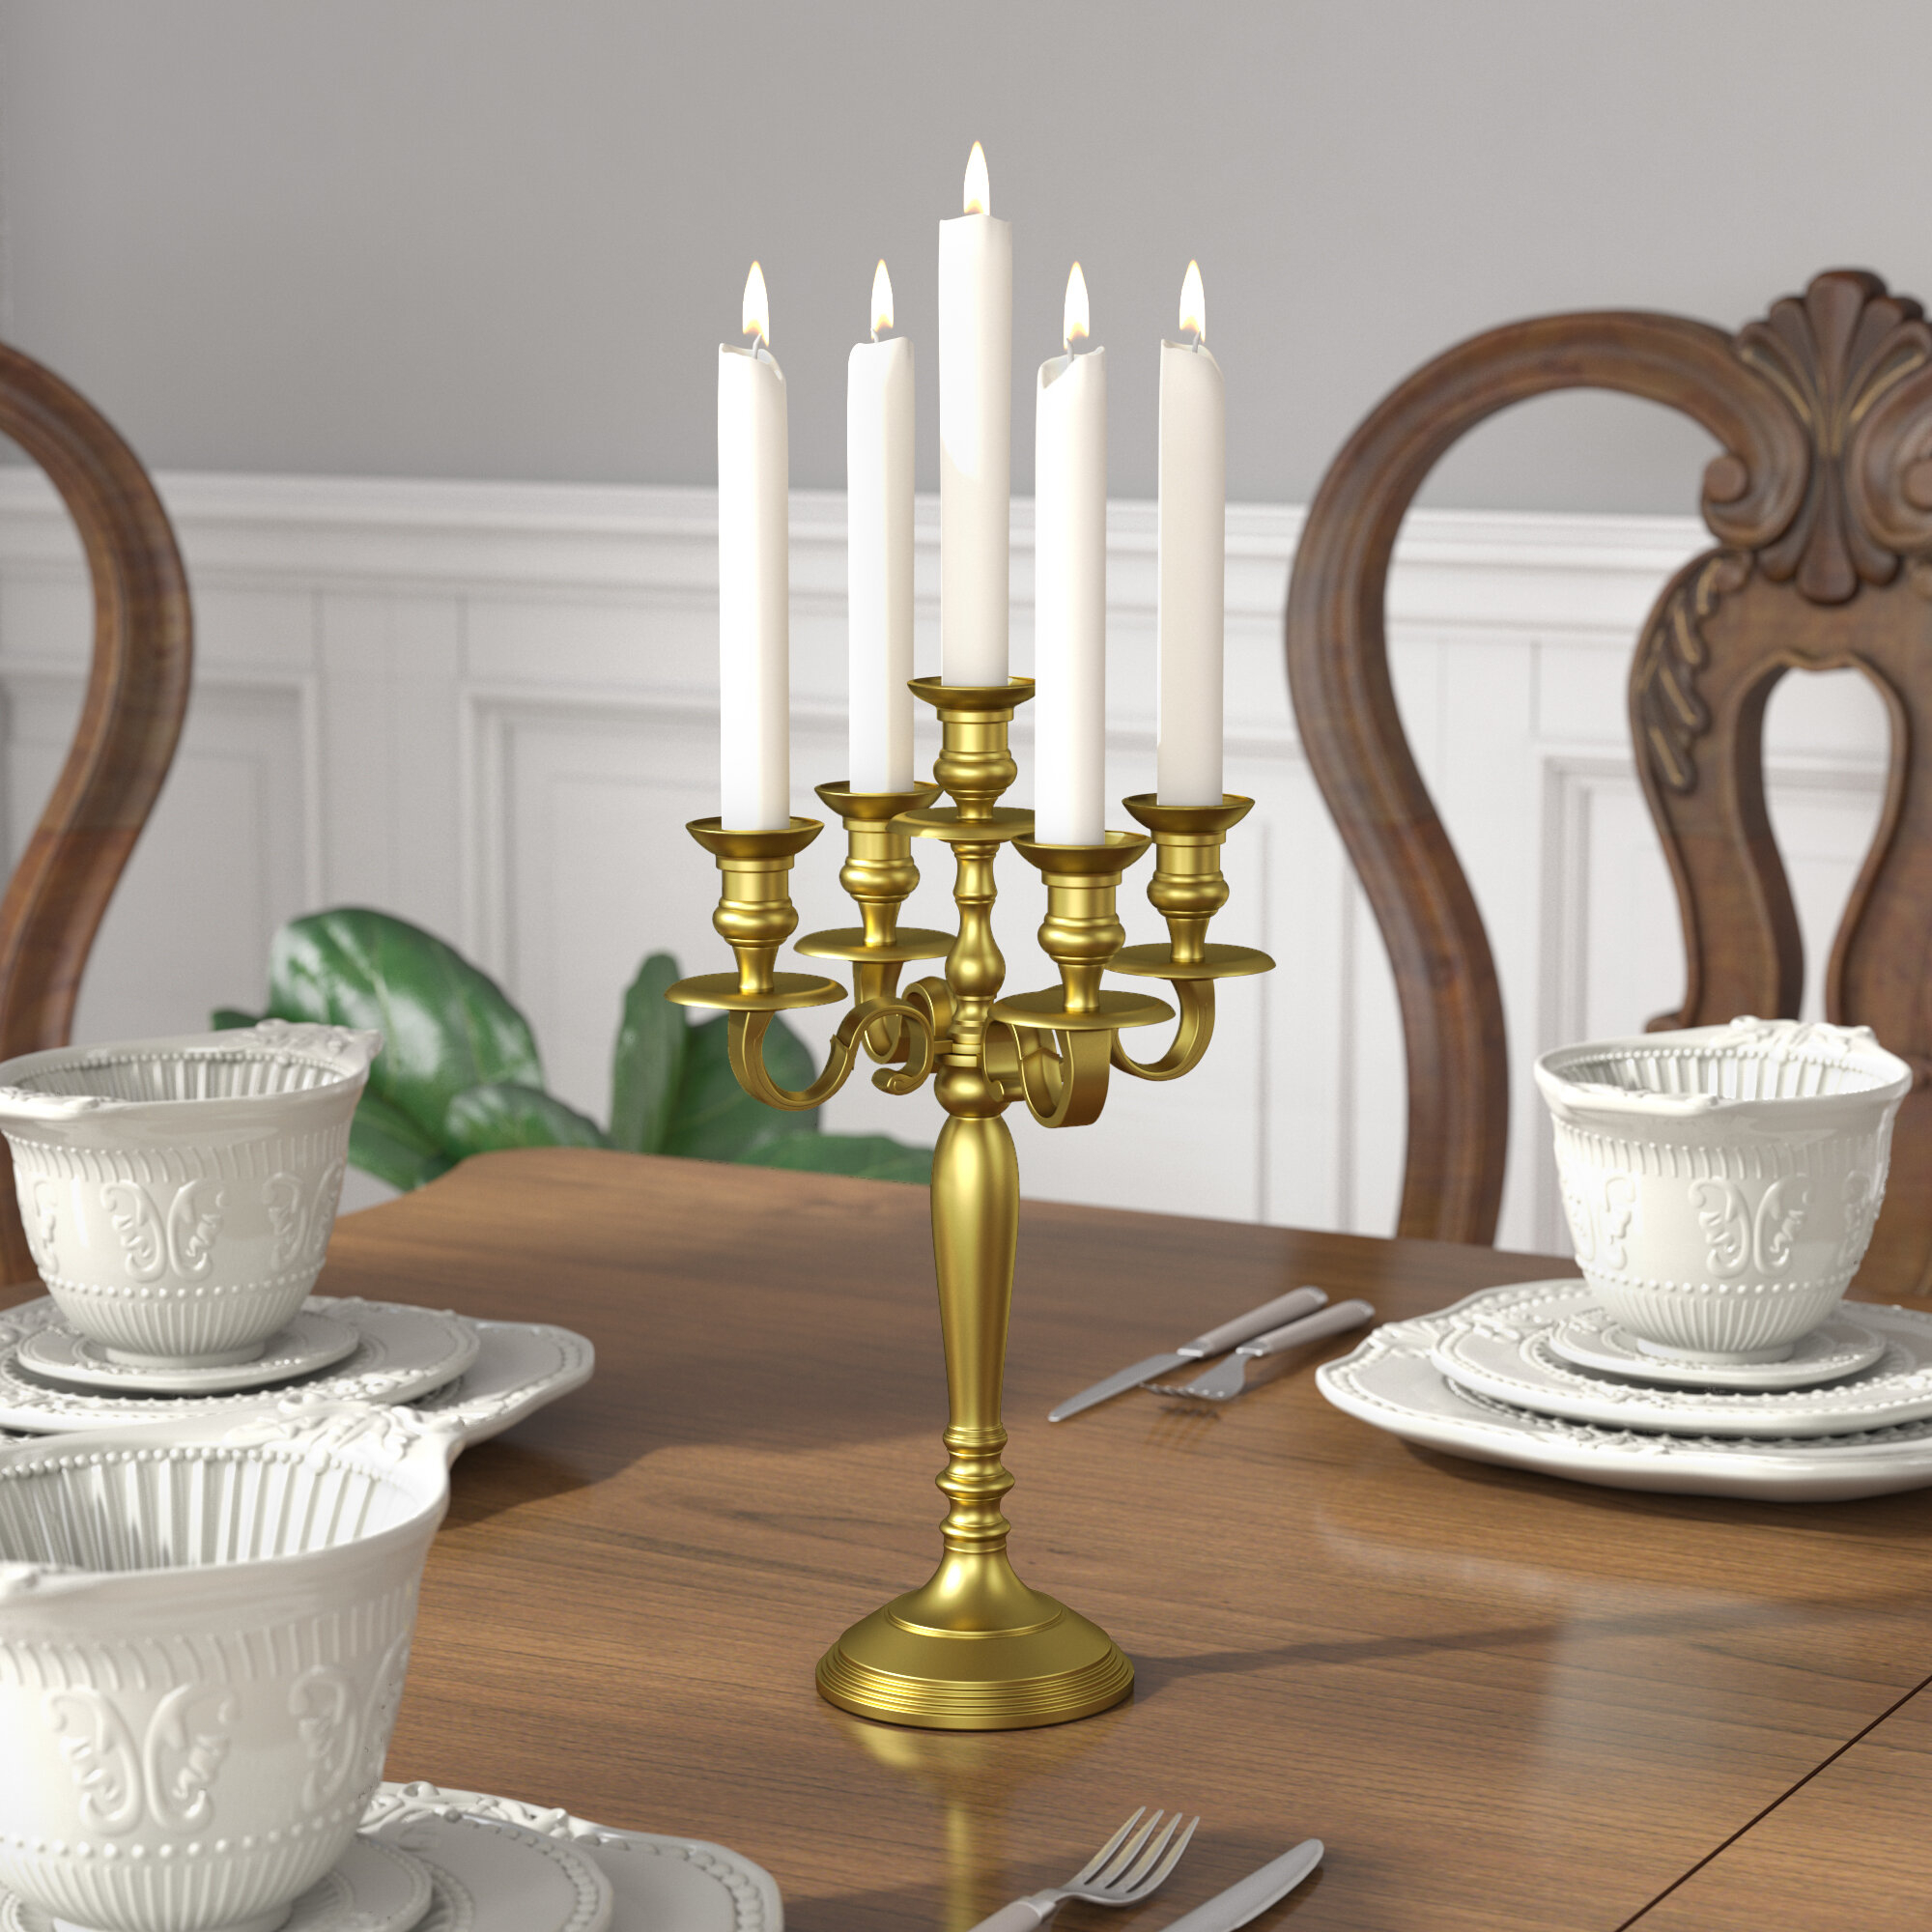 3 Expert Tips To Choose A Candle Holder - VisualHunt